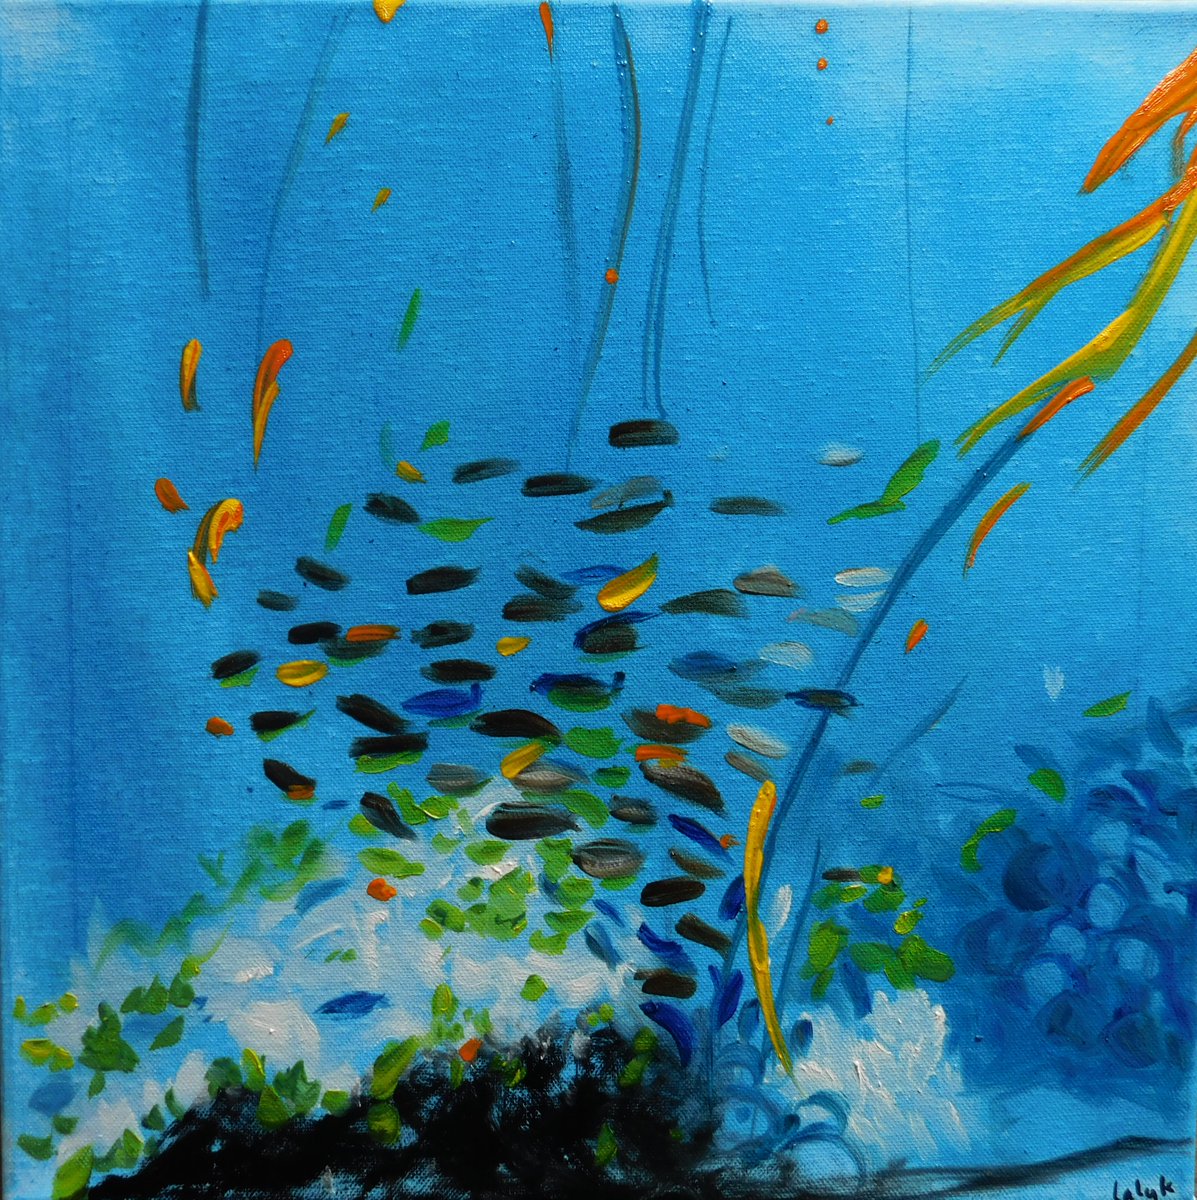 Original abstract oil painting, seascape, signed by Nalan Laluk: 'On the Reef' etsy.me/3JfvKxc via @Etsy #NalanLaluk #oilpainting #oil #impressionistpainting #contemporaryart #newart #impressionism #originalpainting #originalart #seascape #fish #reef #ocean #sealife